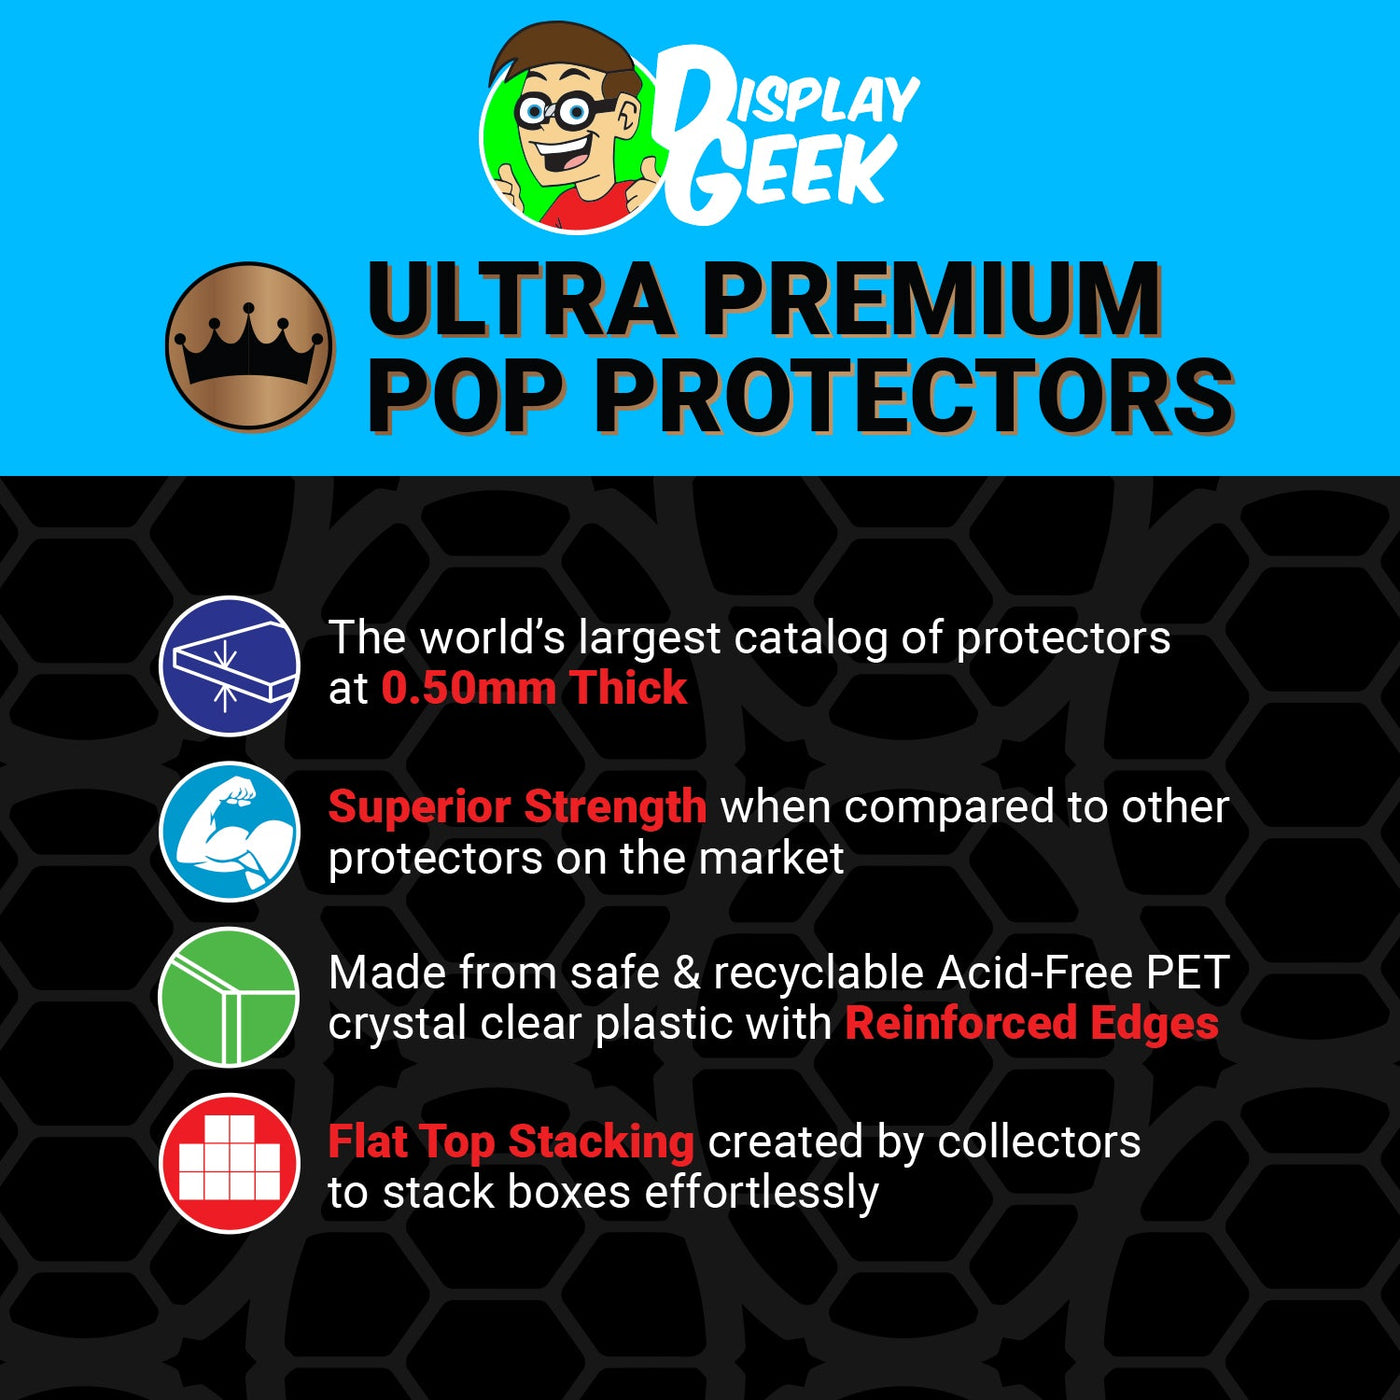 Pop Protector for Escape Pod Landing #222 Funko Pop Movie Moments on The Protector Guide App by Display Geek